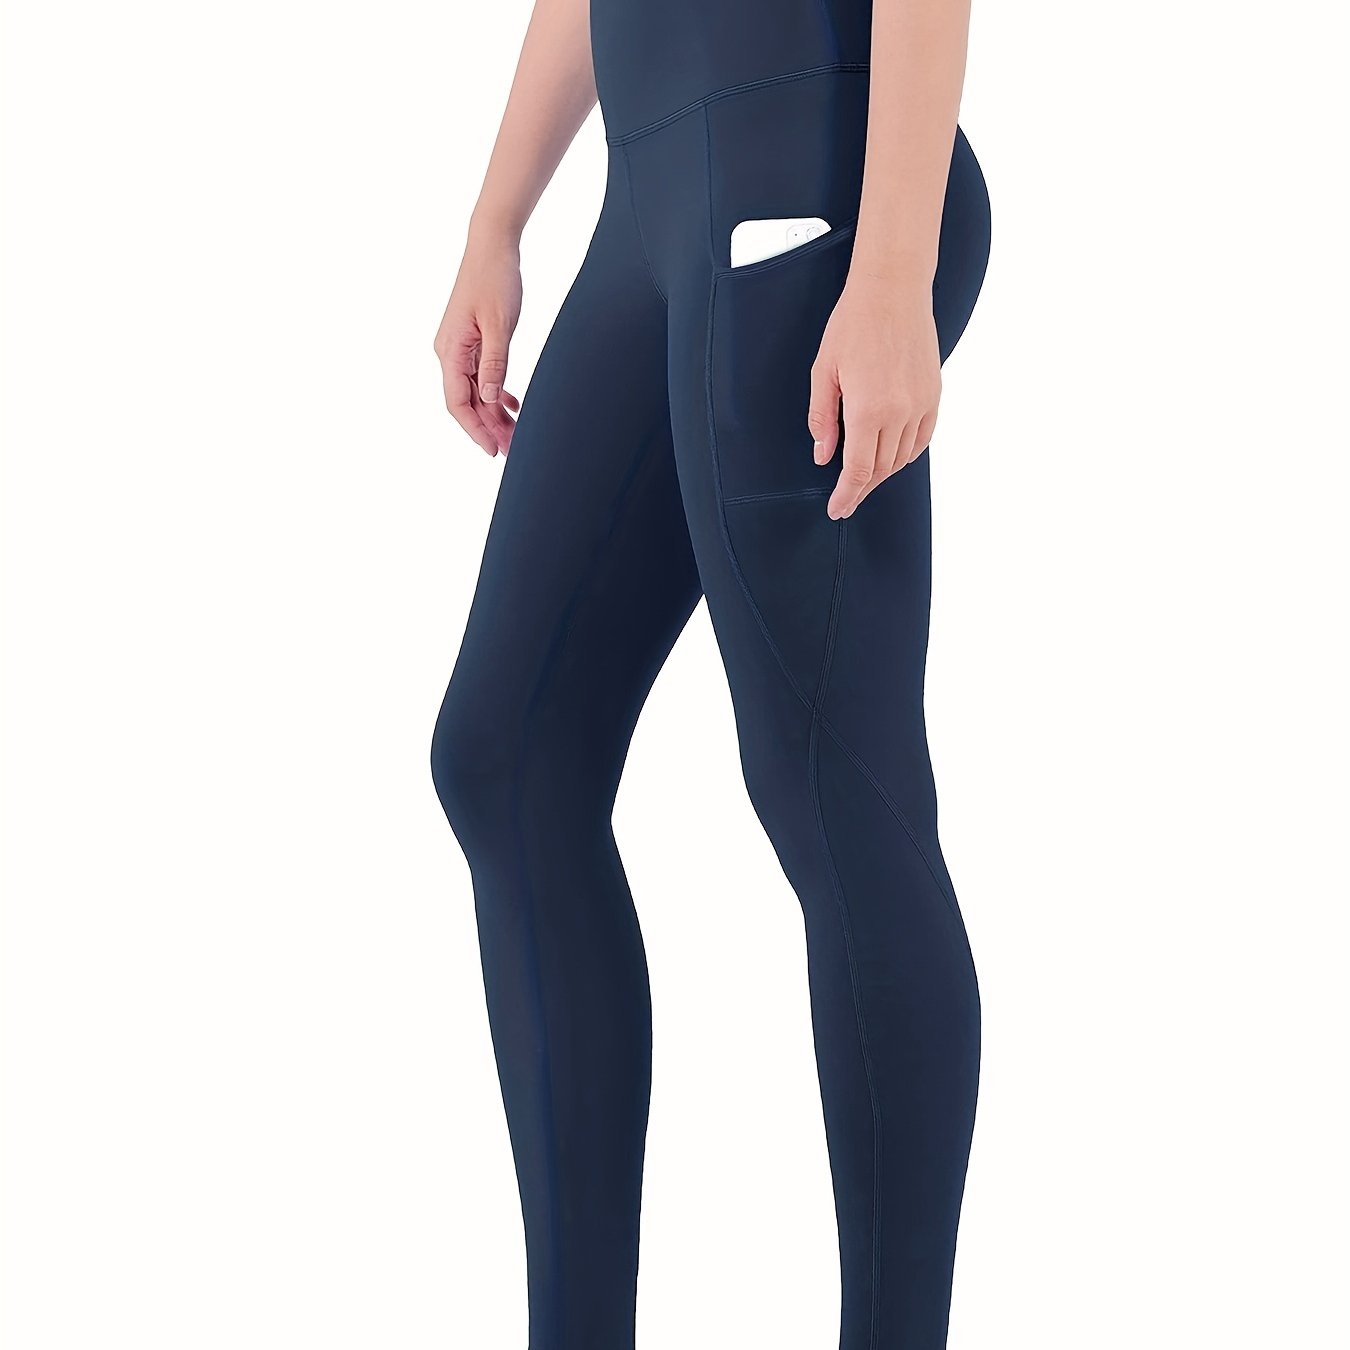 Leggings With Pockets For Women, High Waist Tummy Control